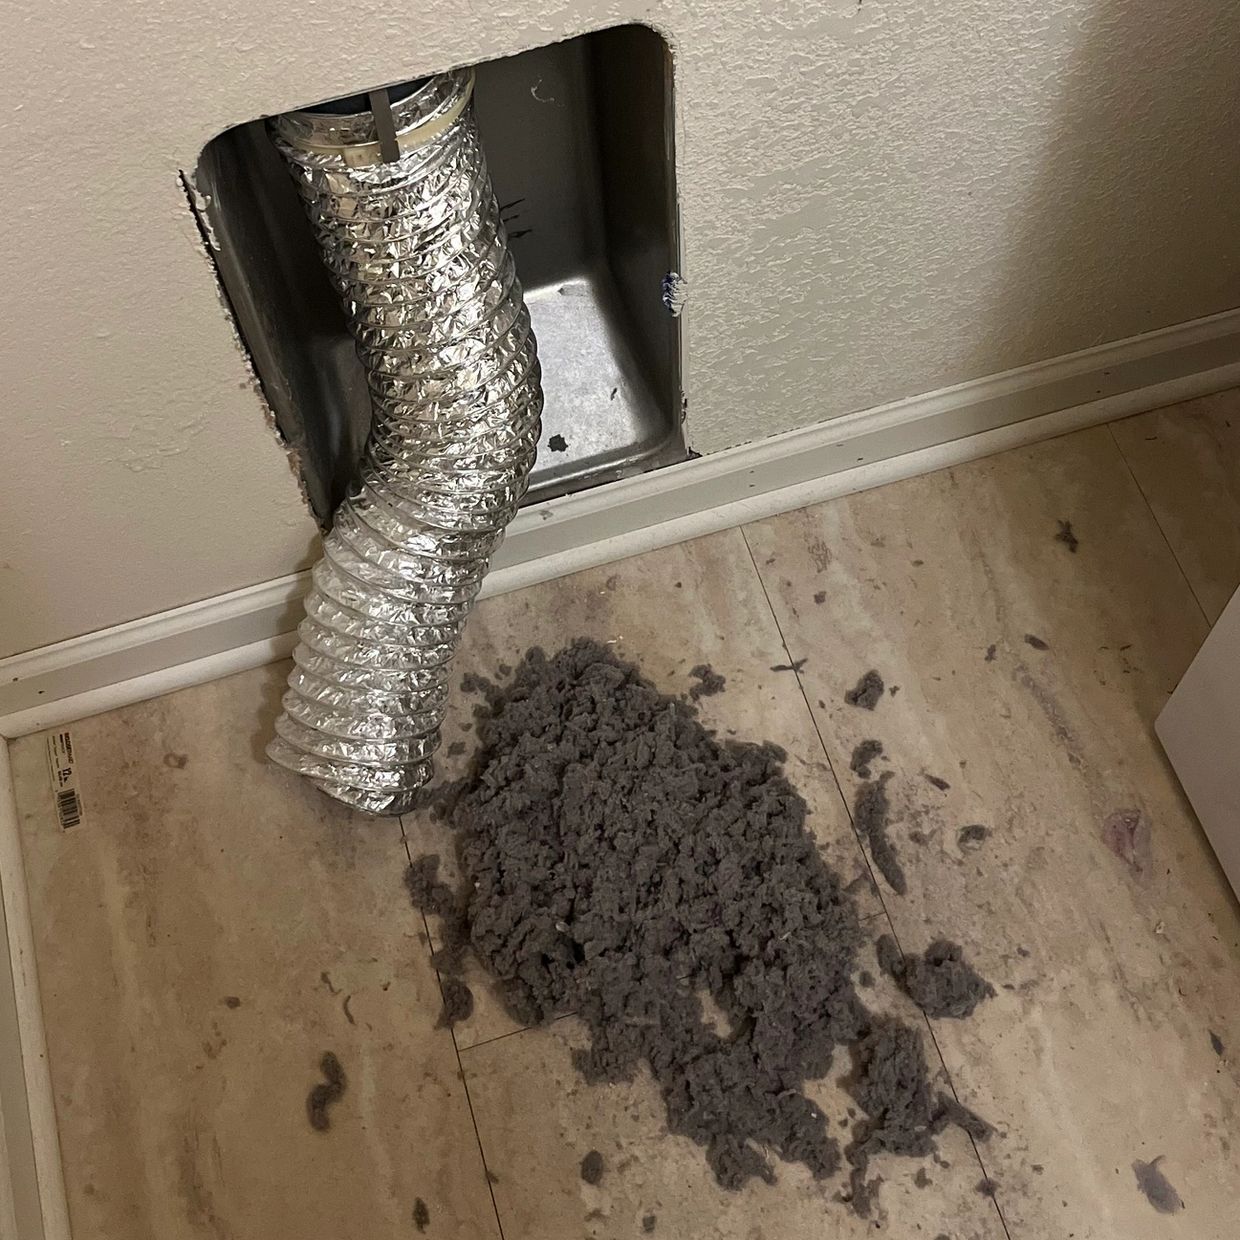 This is only 6 feet of cleaning is a dryer vent.